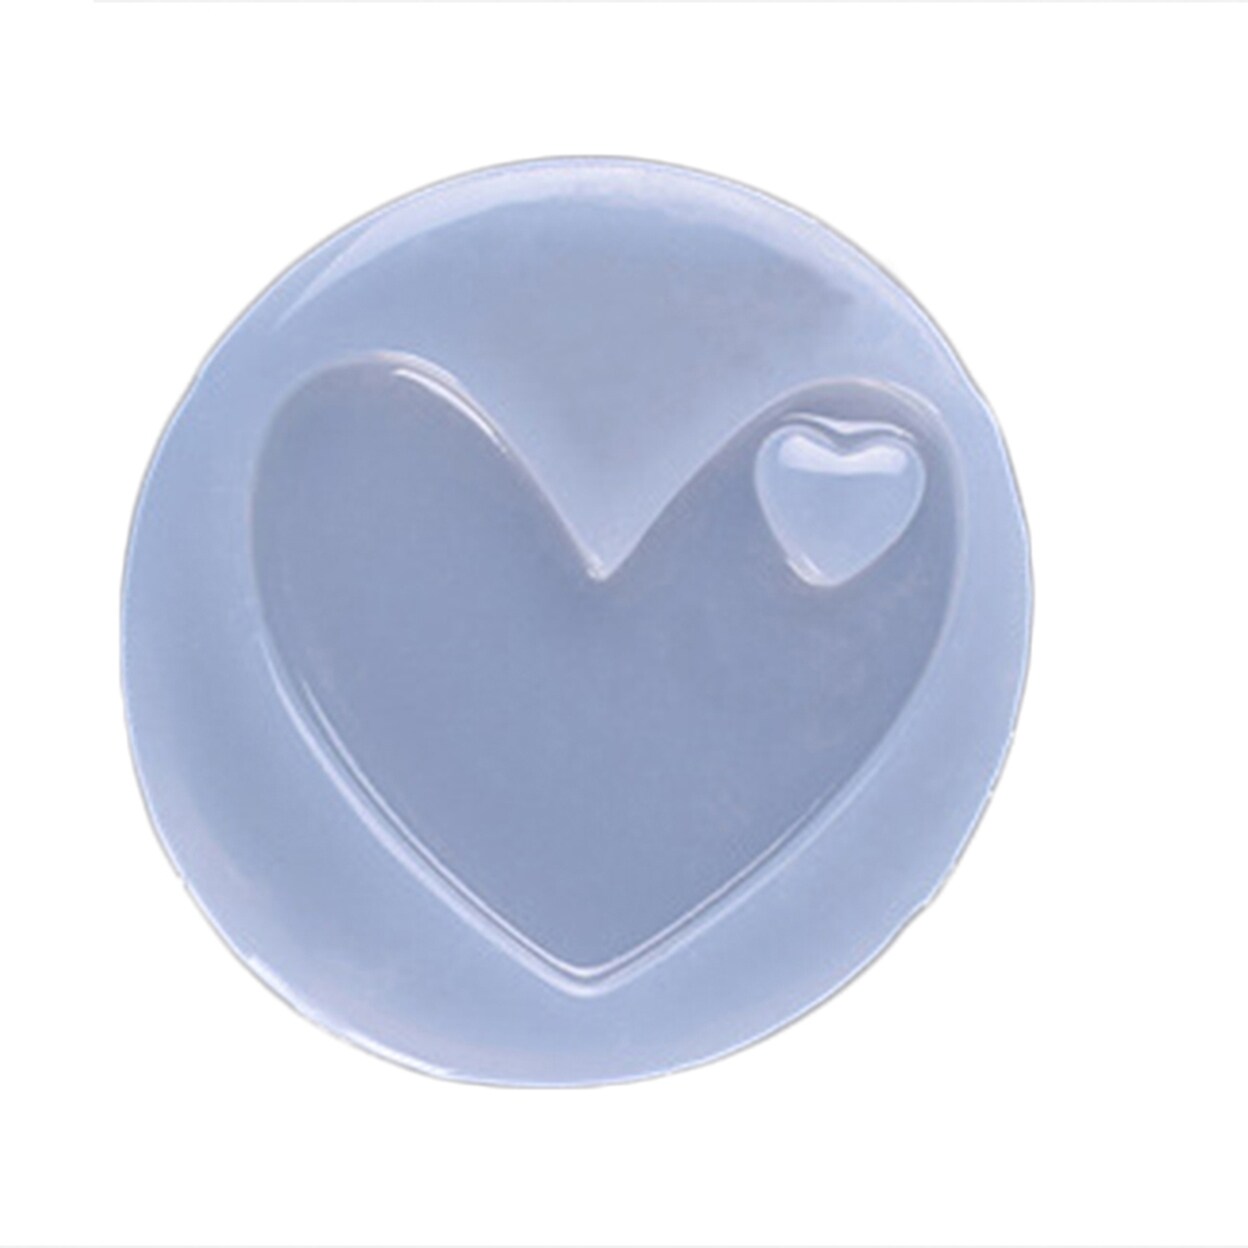 Generic Heart Star Pendant Silicone Mould DIY Resin Crafts Decor Jewelry Making Mold